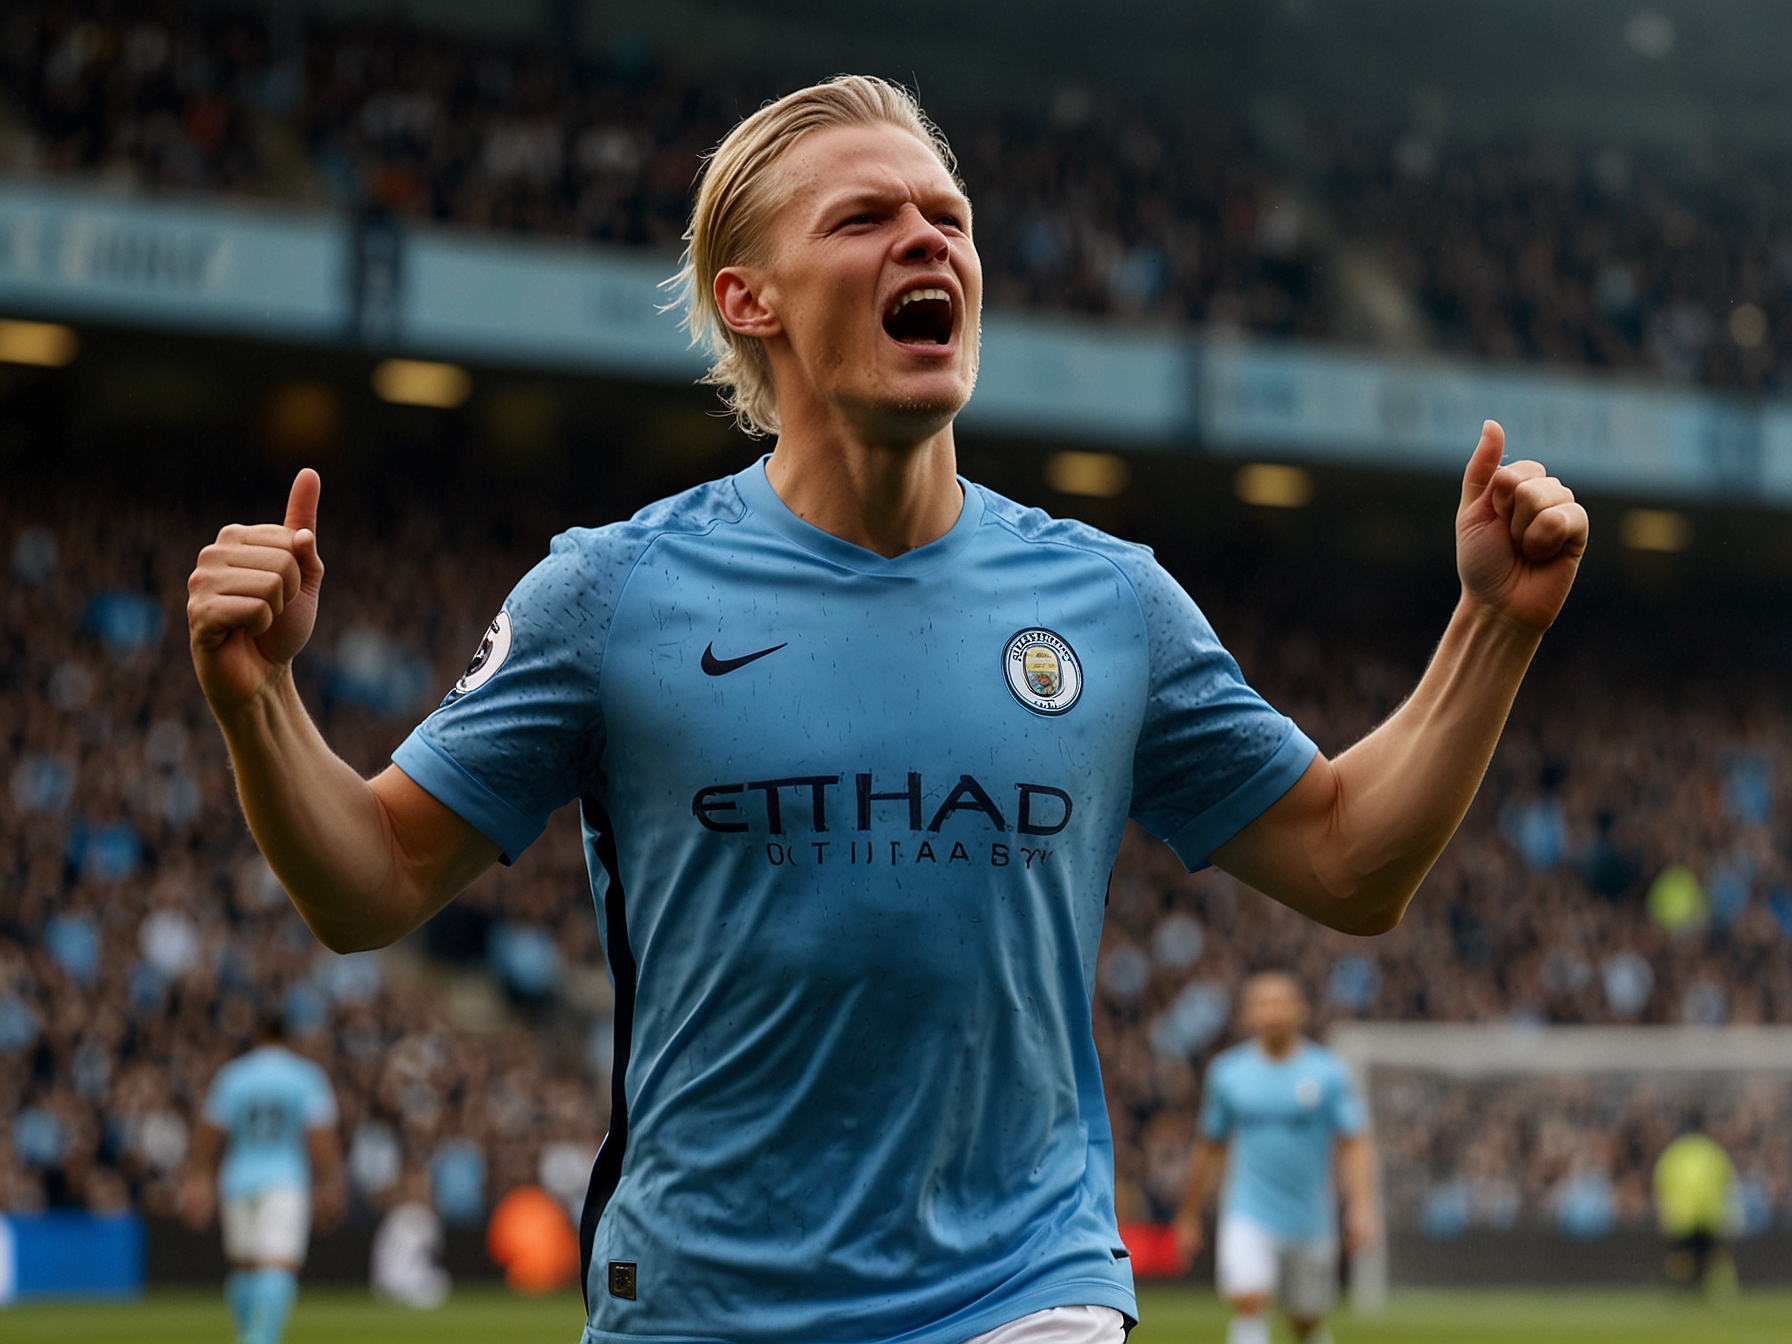 Erling Haaland, in a Manchester City jersey, celebrates after scoring a goal during a Premier League match. His determined expression and triumphant gesture capture his importance to the team.